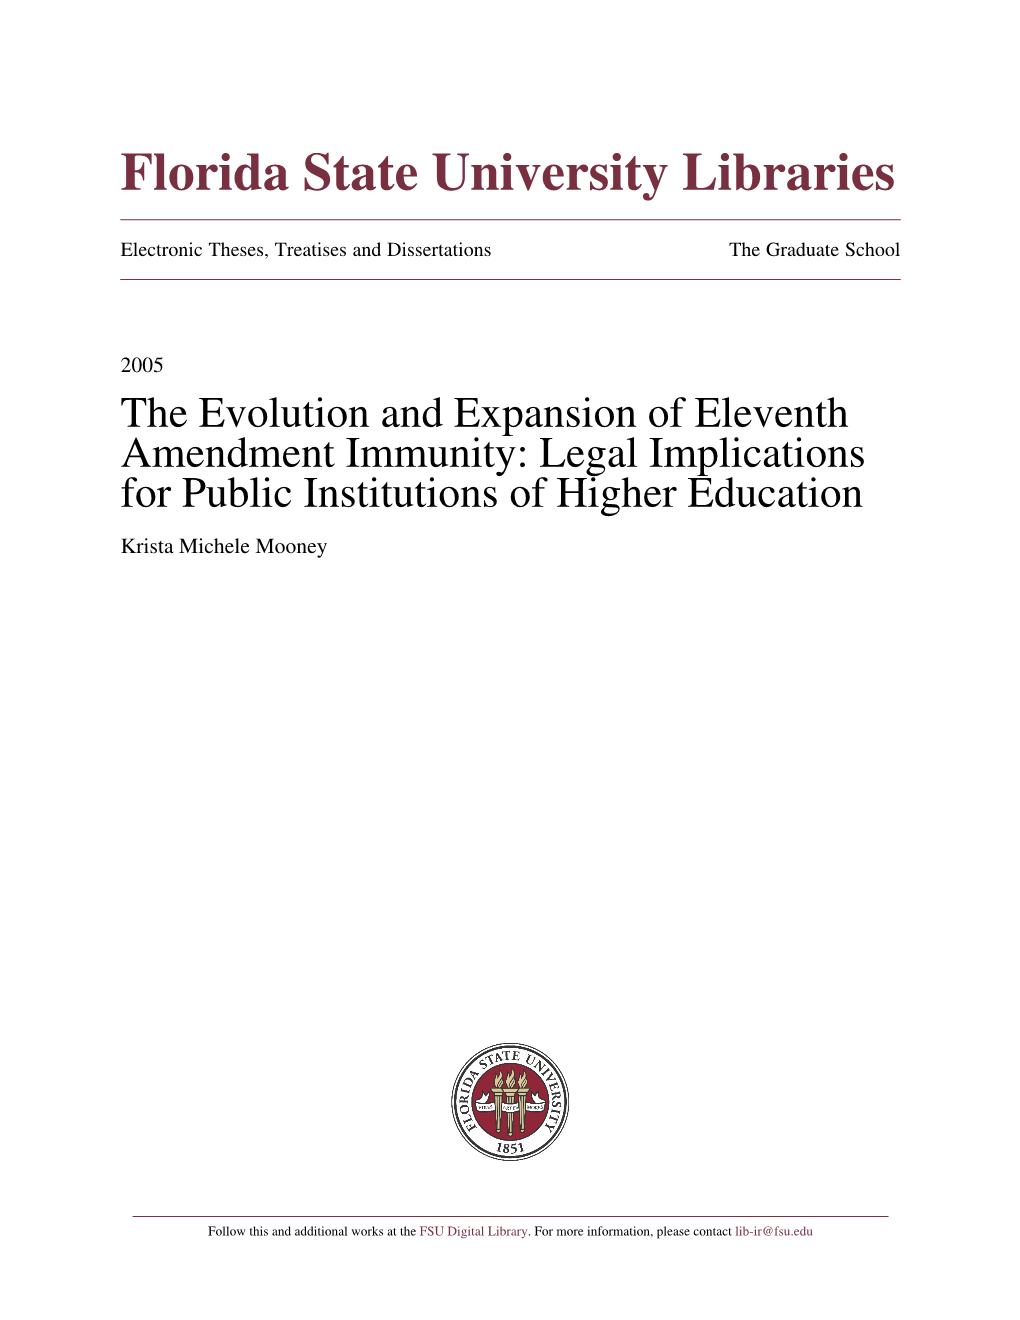 The Evolution and Expansion of Eleventh Amendment Immunity: Legal Implications for Public Institutions of Higher Education Krista Michele Mooney